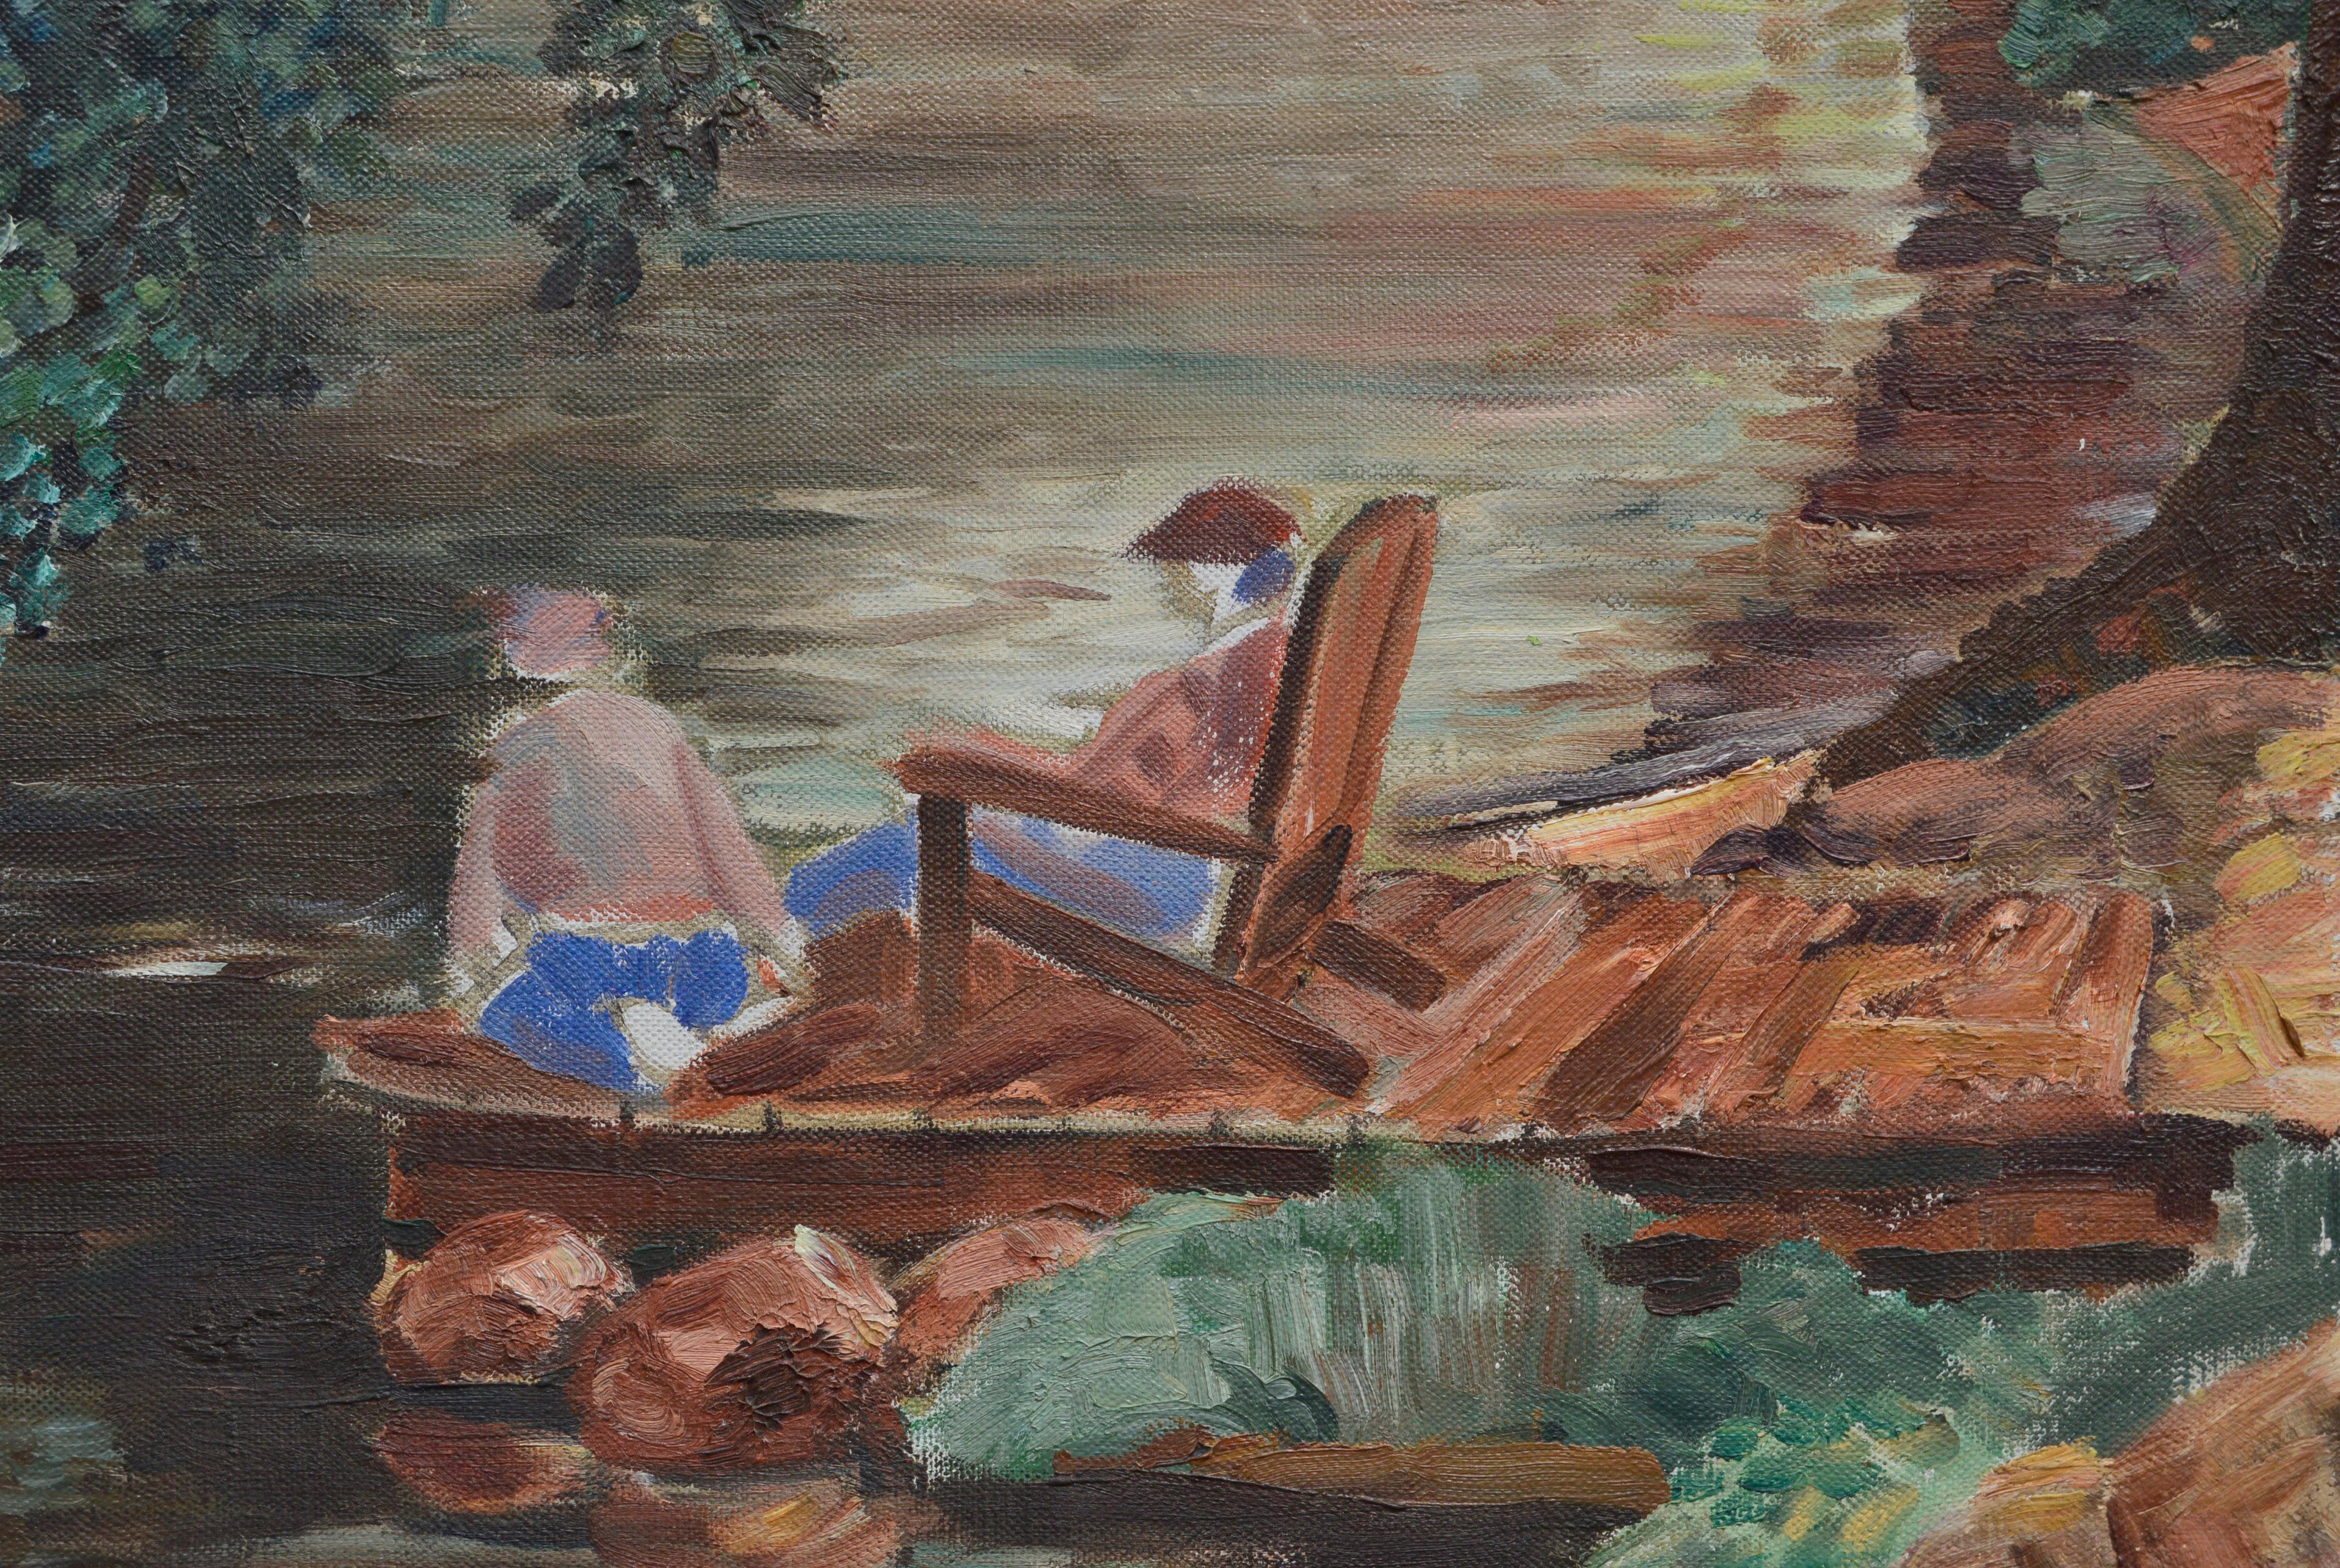 Sitting by the Lake, Mid Century Figurative Landscape - Painting by Joseph Yeager